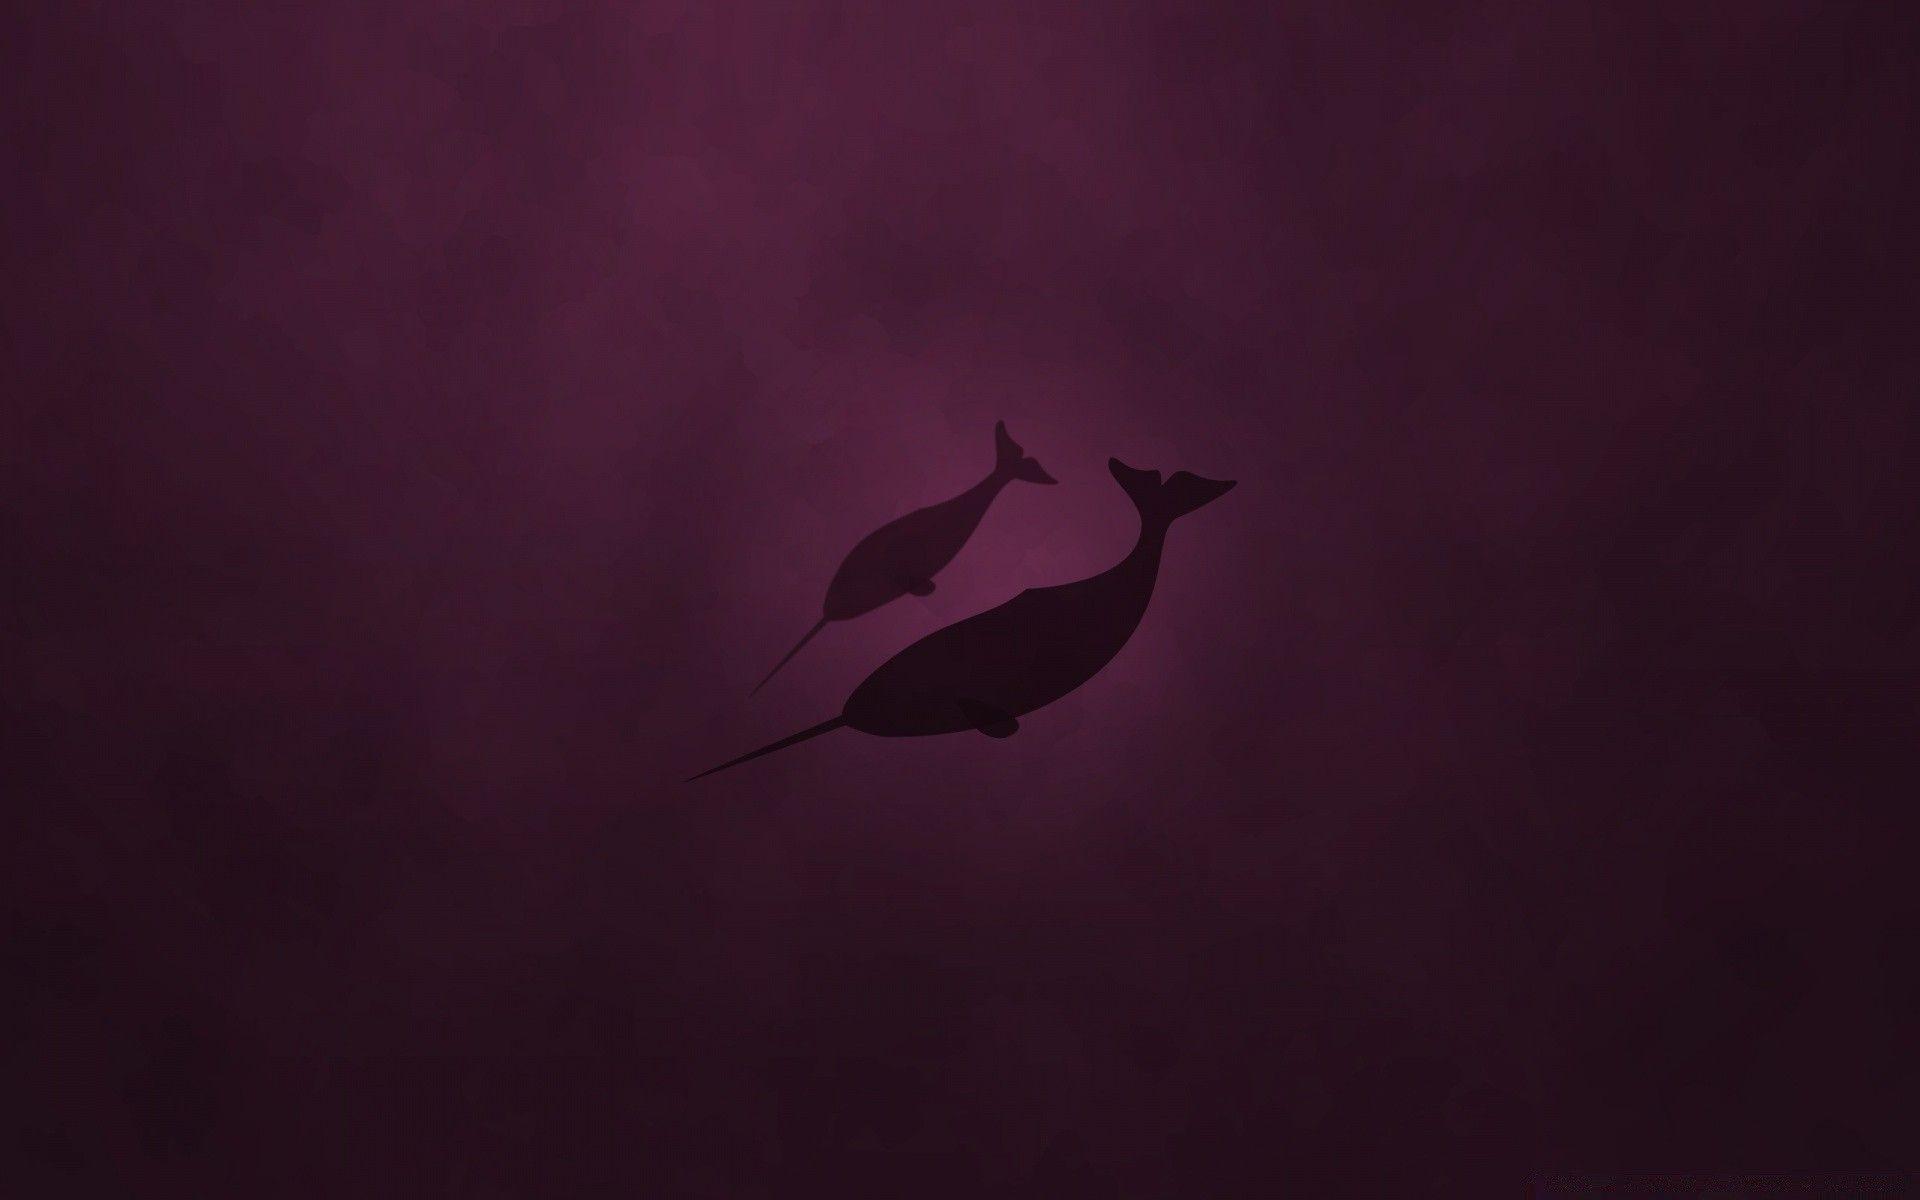 Linux Natty Narwhal. Android wallpaper for free